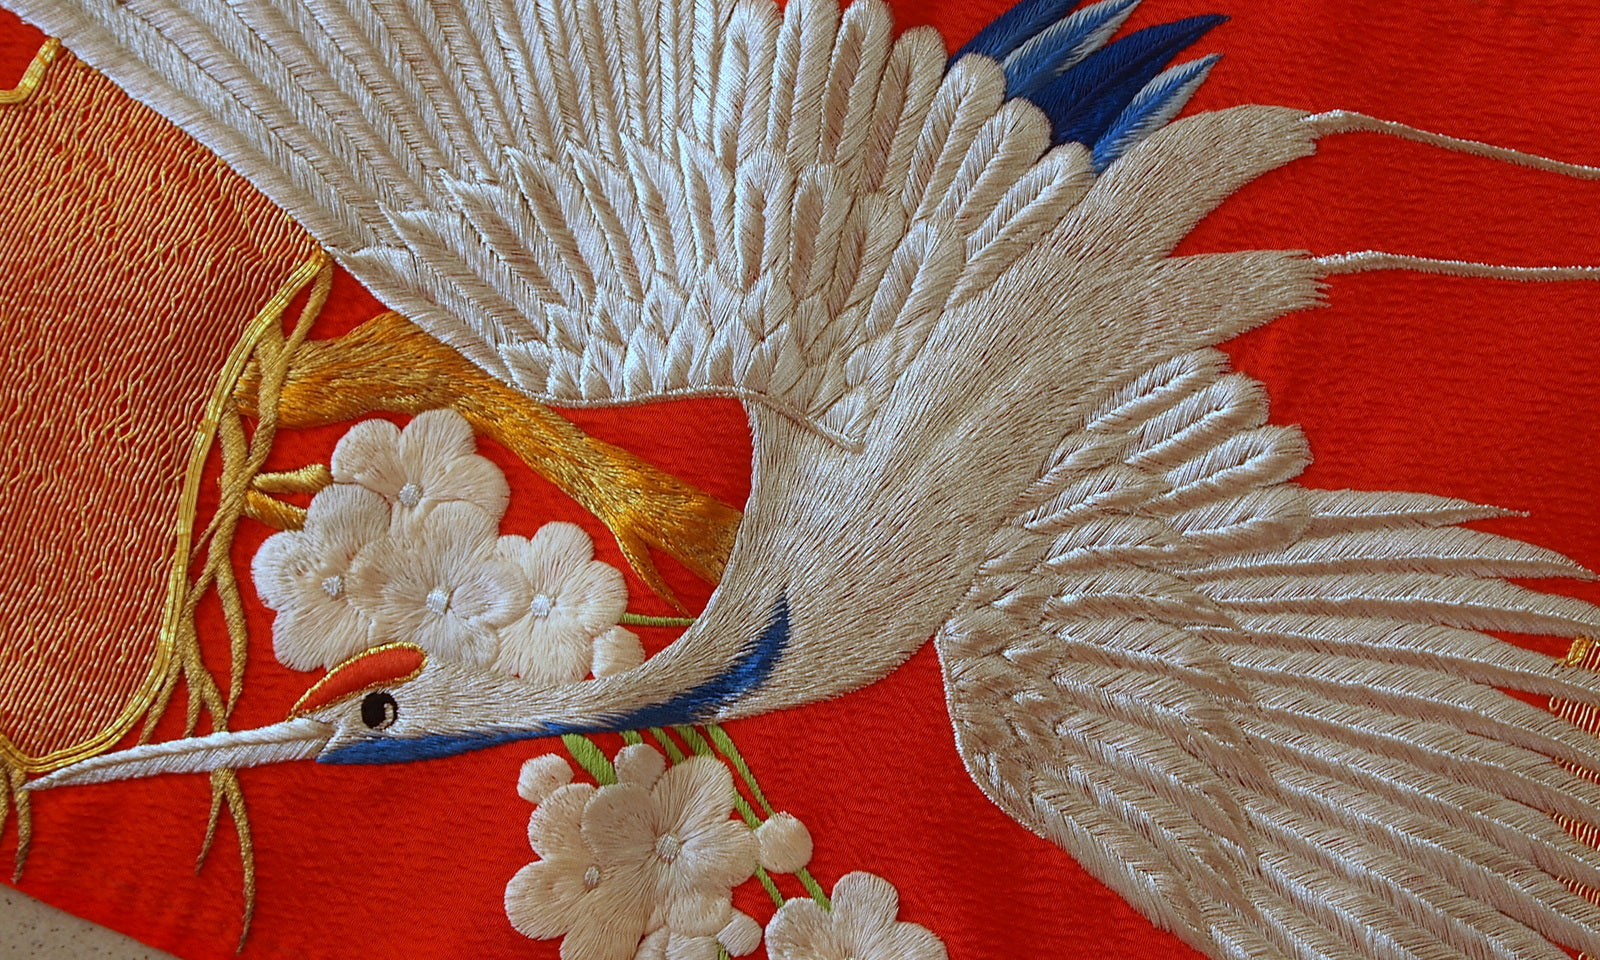 Handmade vintage embroidery from Japan made in cotton, silk and metal. This beautiful wall decoration has been made in the end of 20th century.